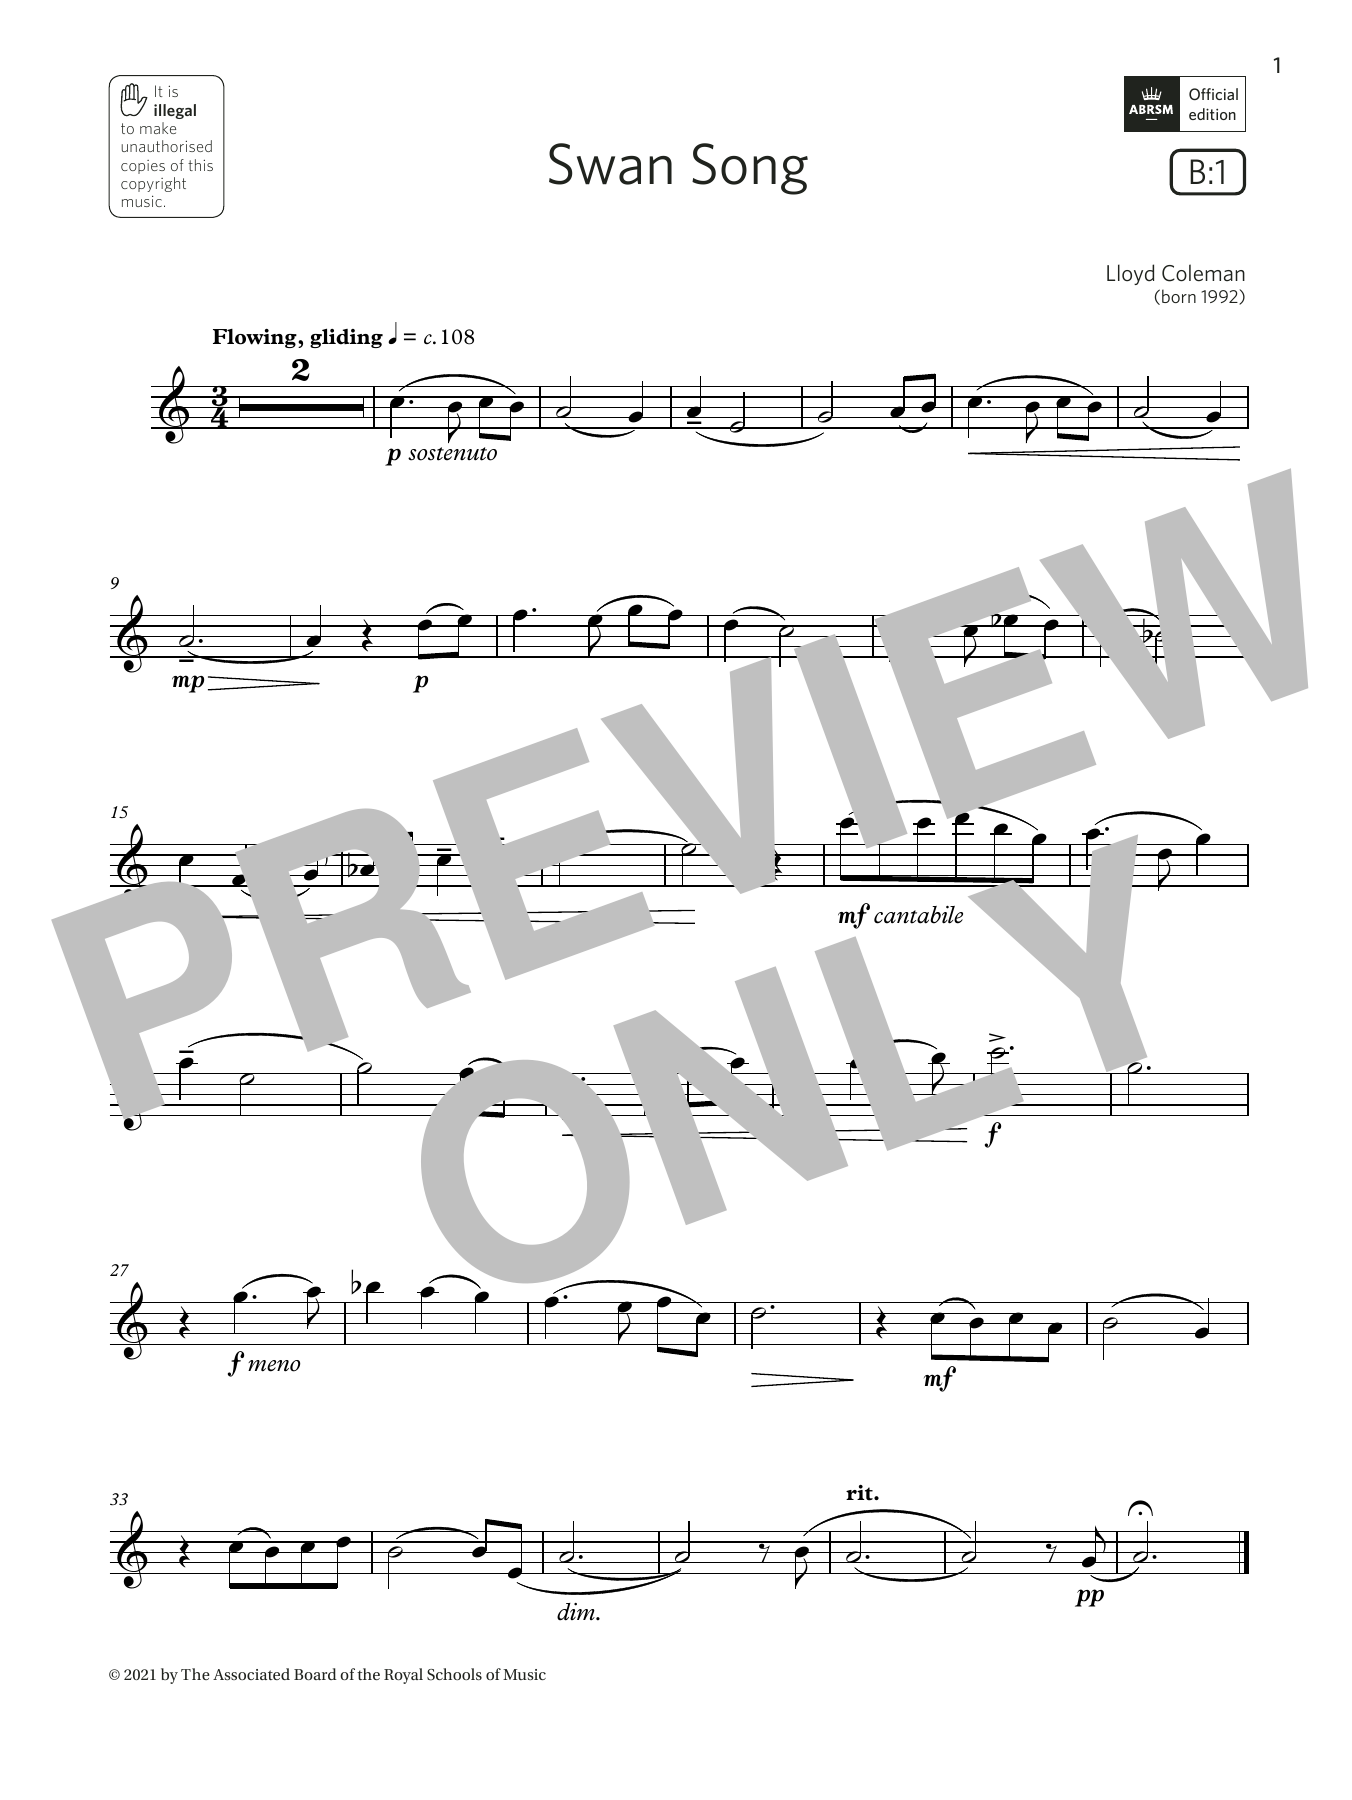 Download Lloyd Coleman Swan Song (Grade 3 List B1 from the ABR Sheet Music